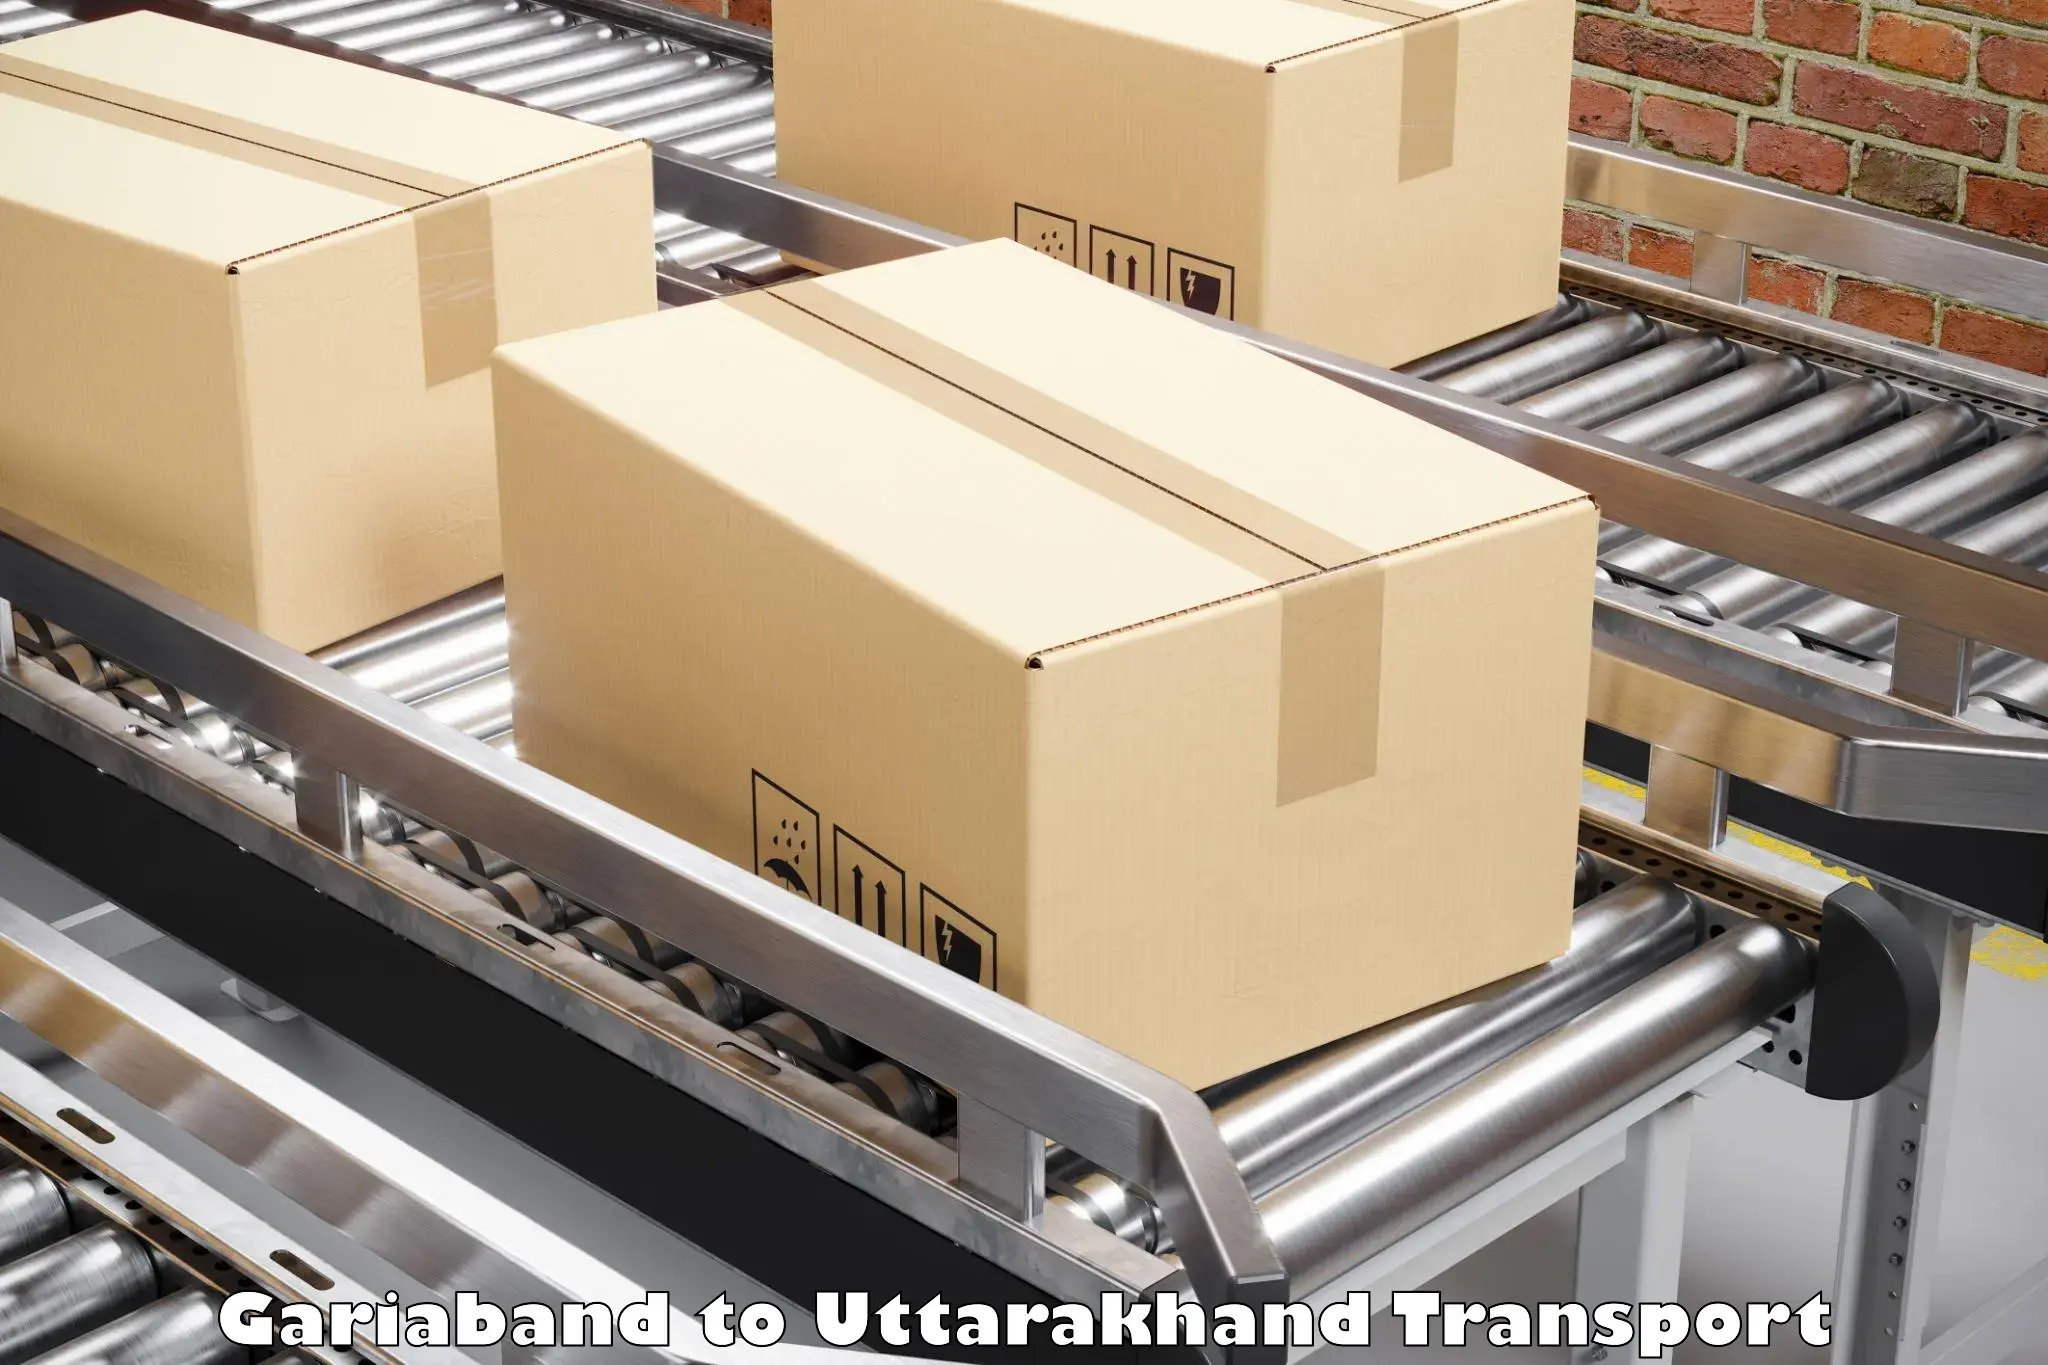 Truck transport companies in India Gariaband to Mussoorie